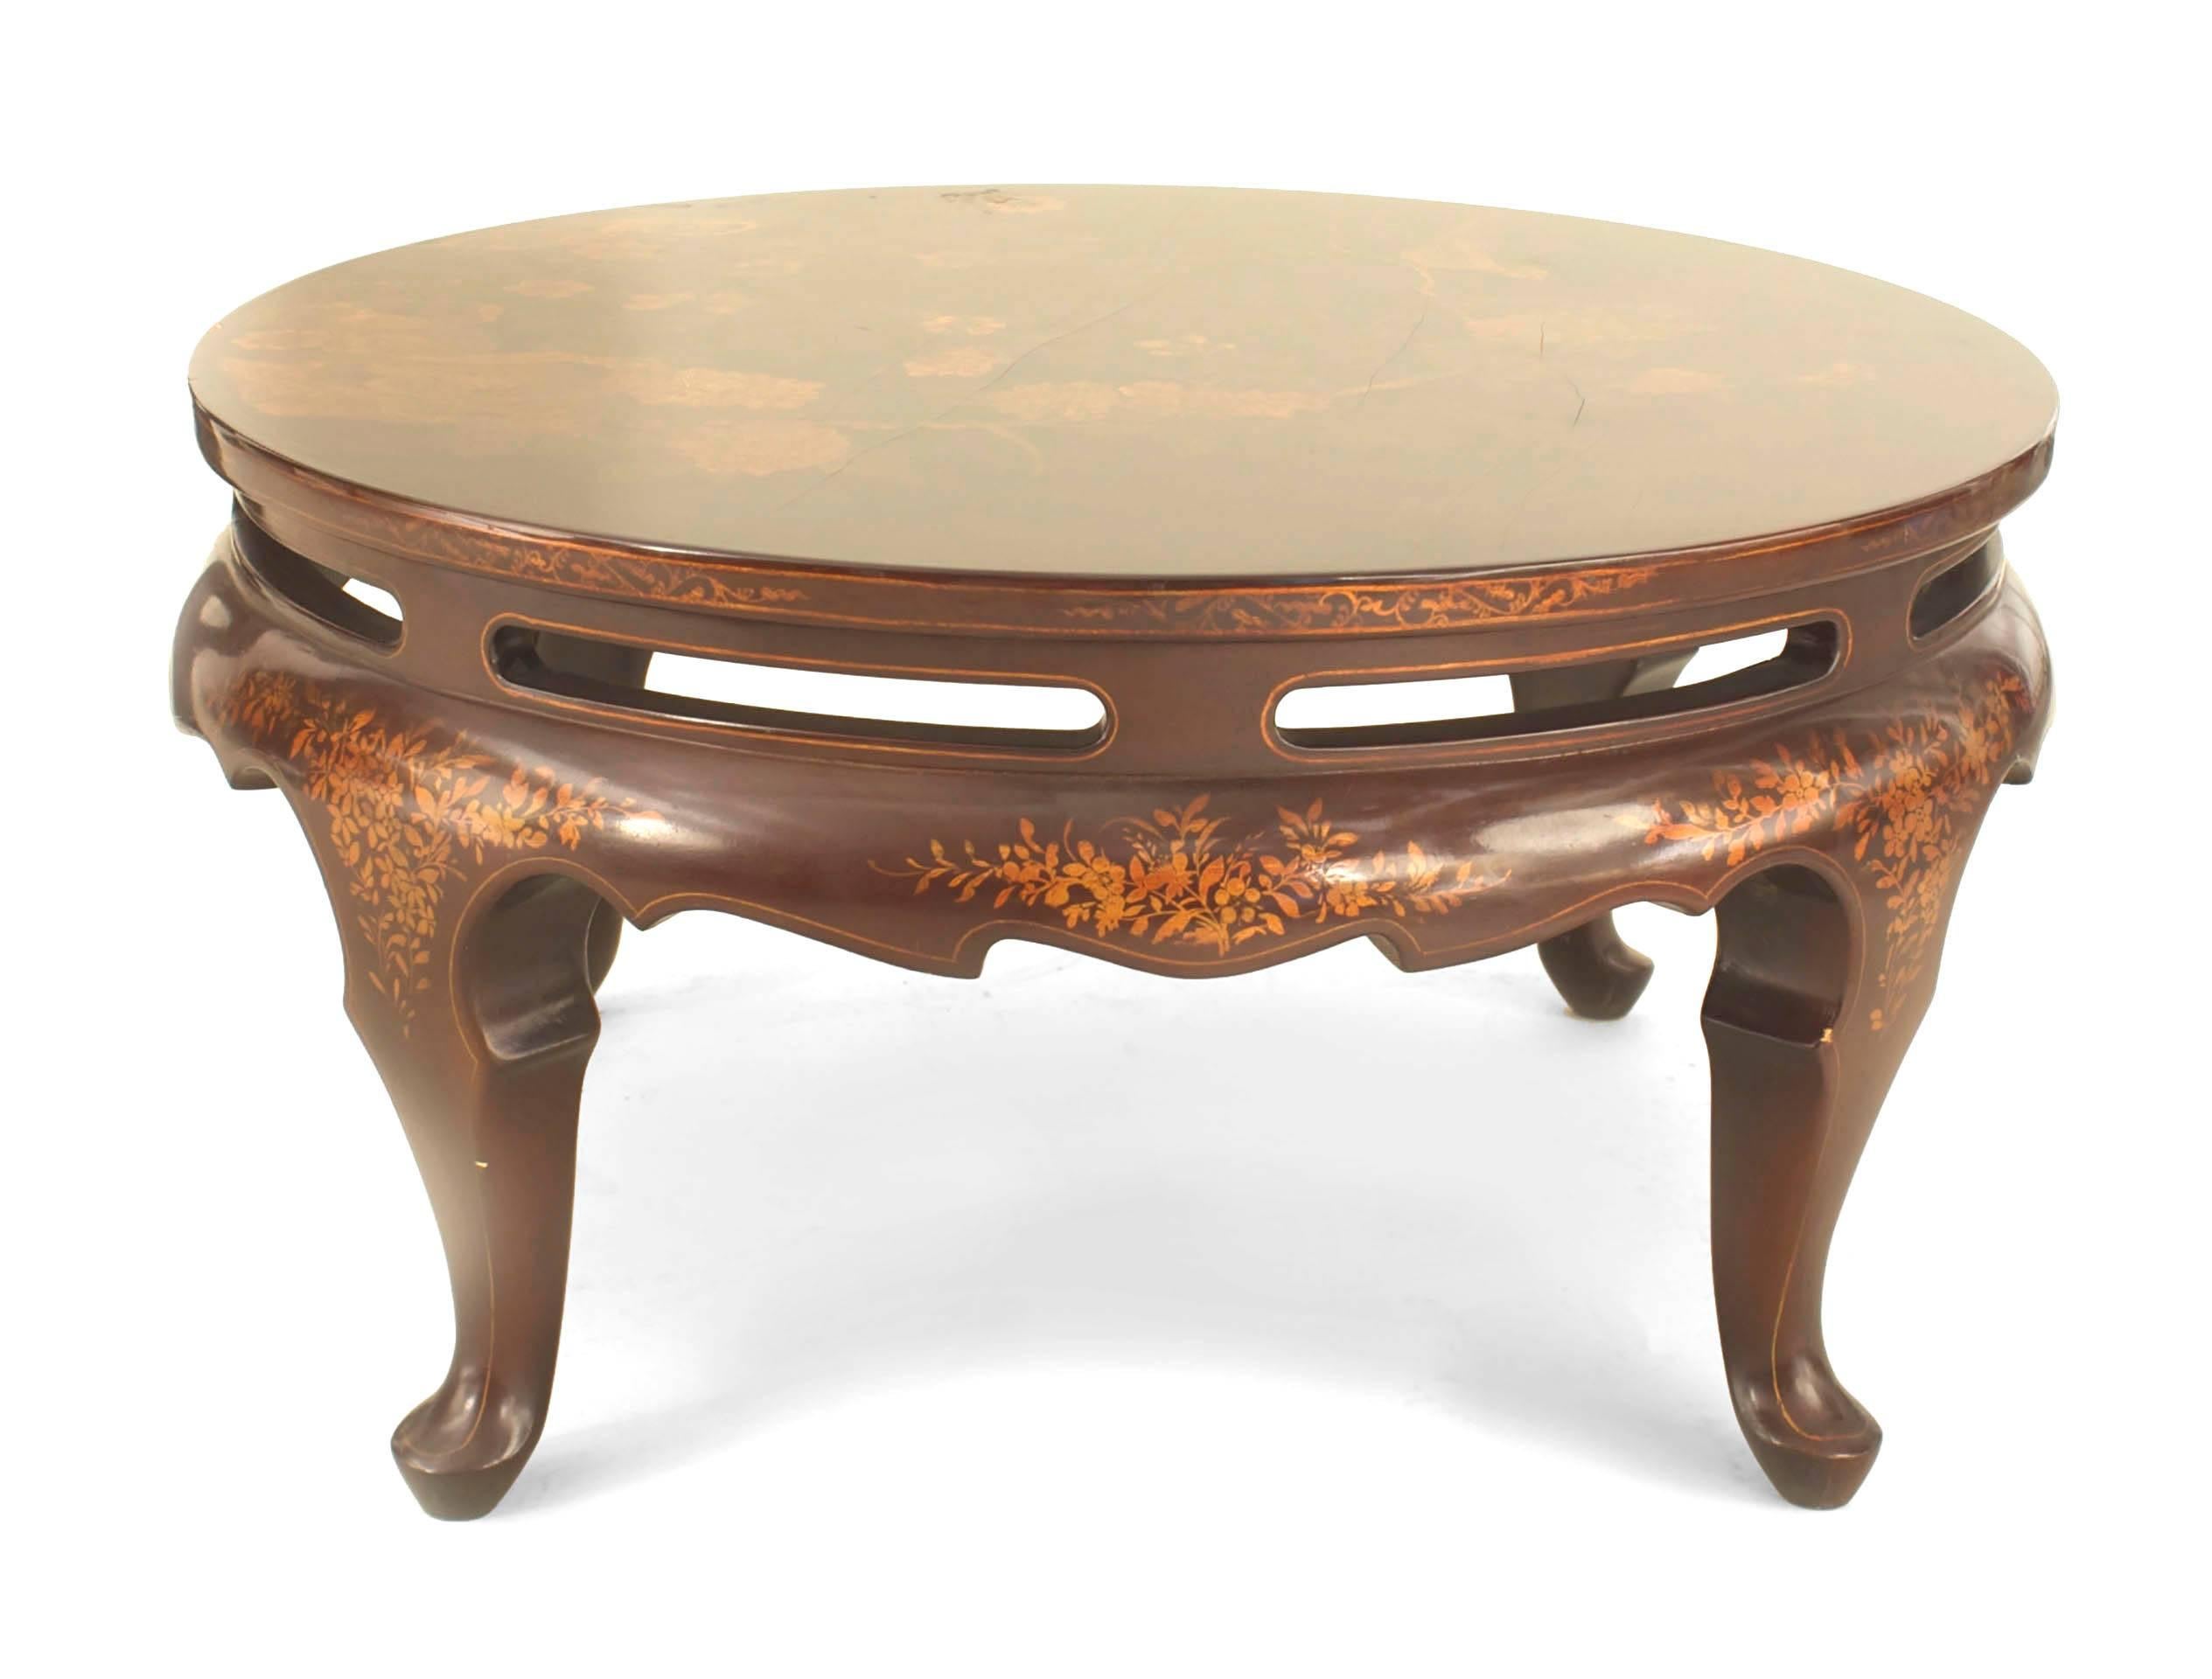 English Queen Anne style round chinoiserie rust lacquer floral design coffee table (20th century).
 